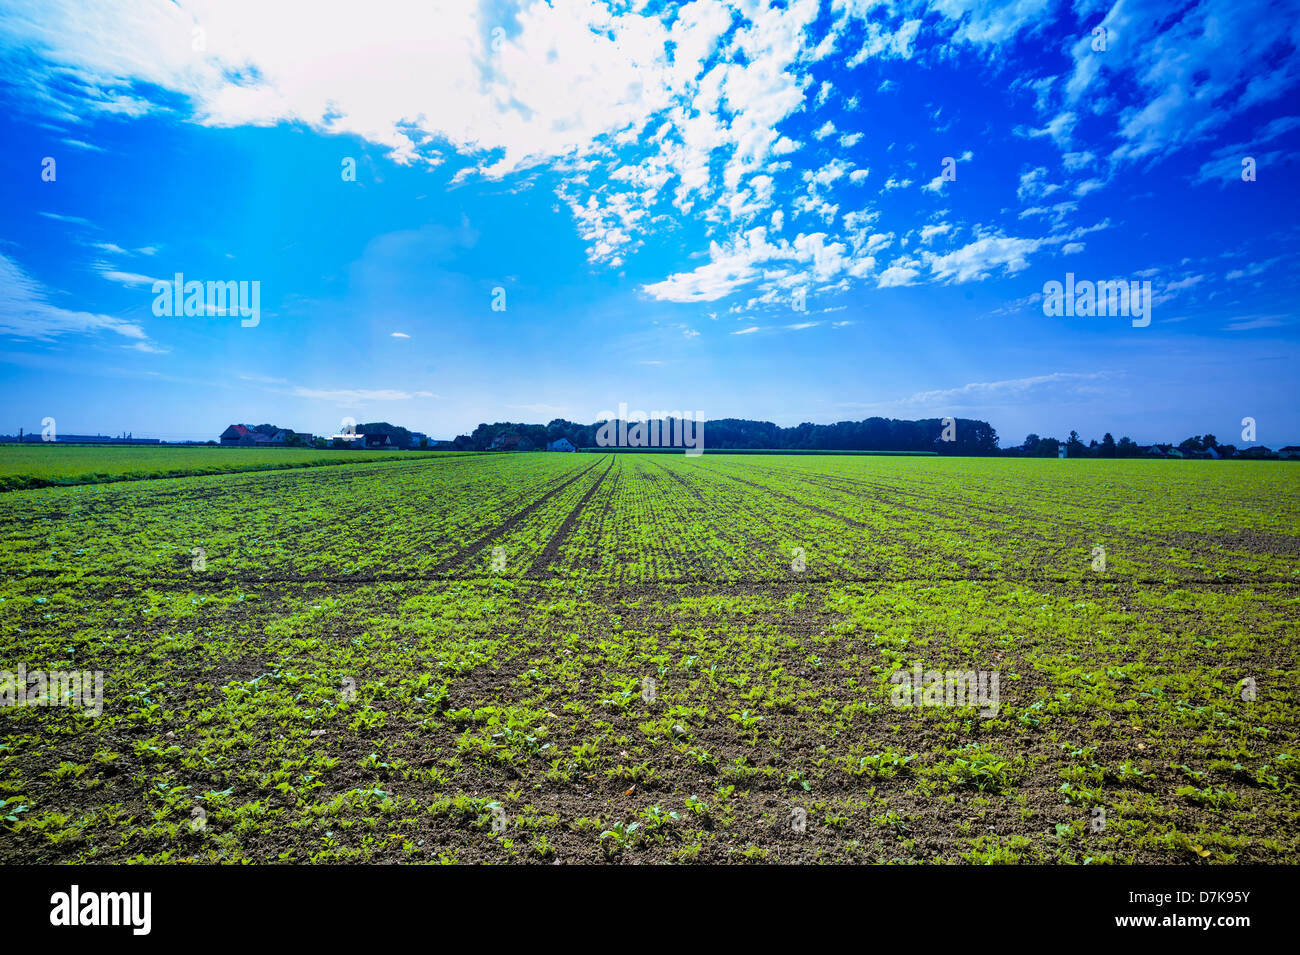 Austria, View of crop field with fresh seedlings Stock Photo